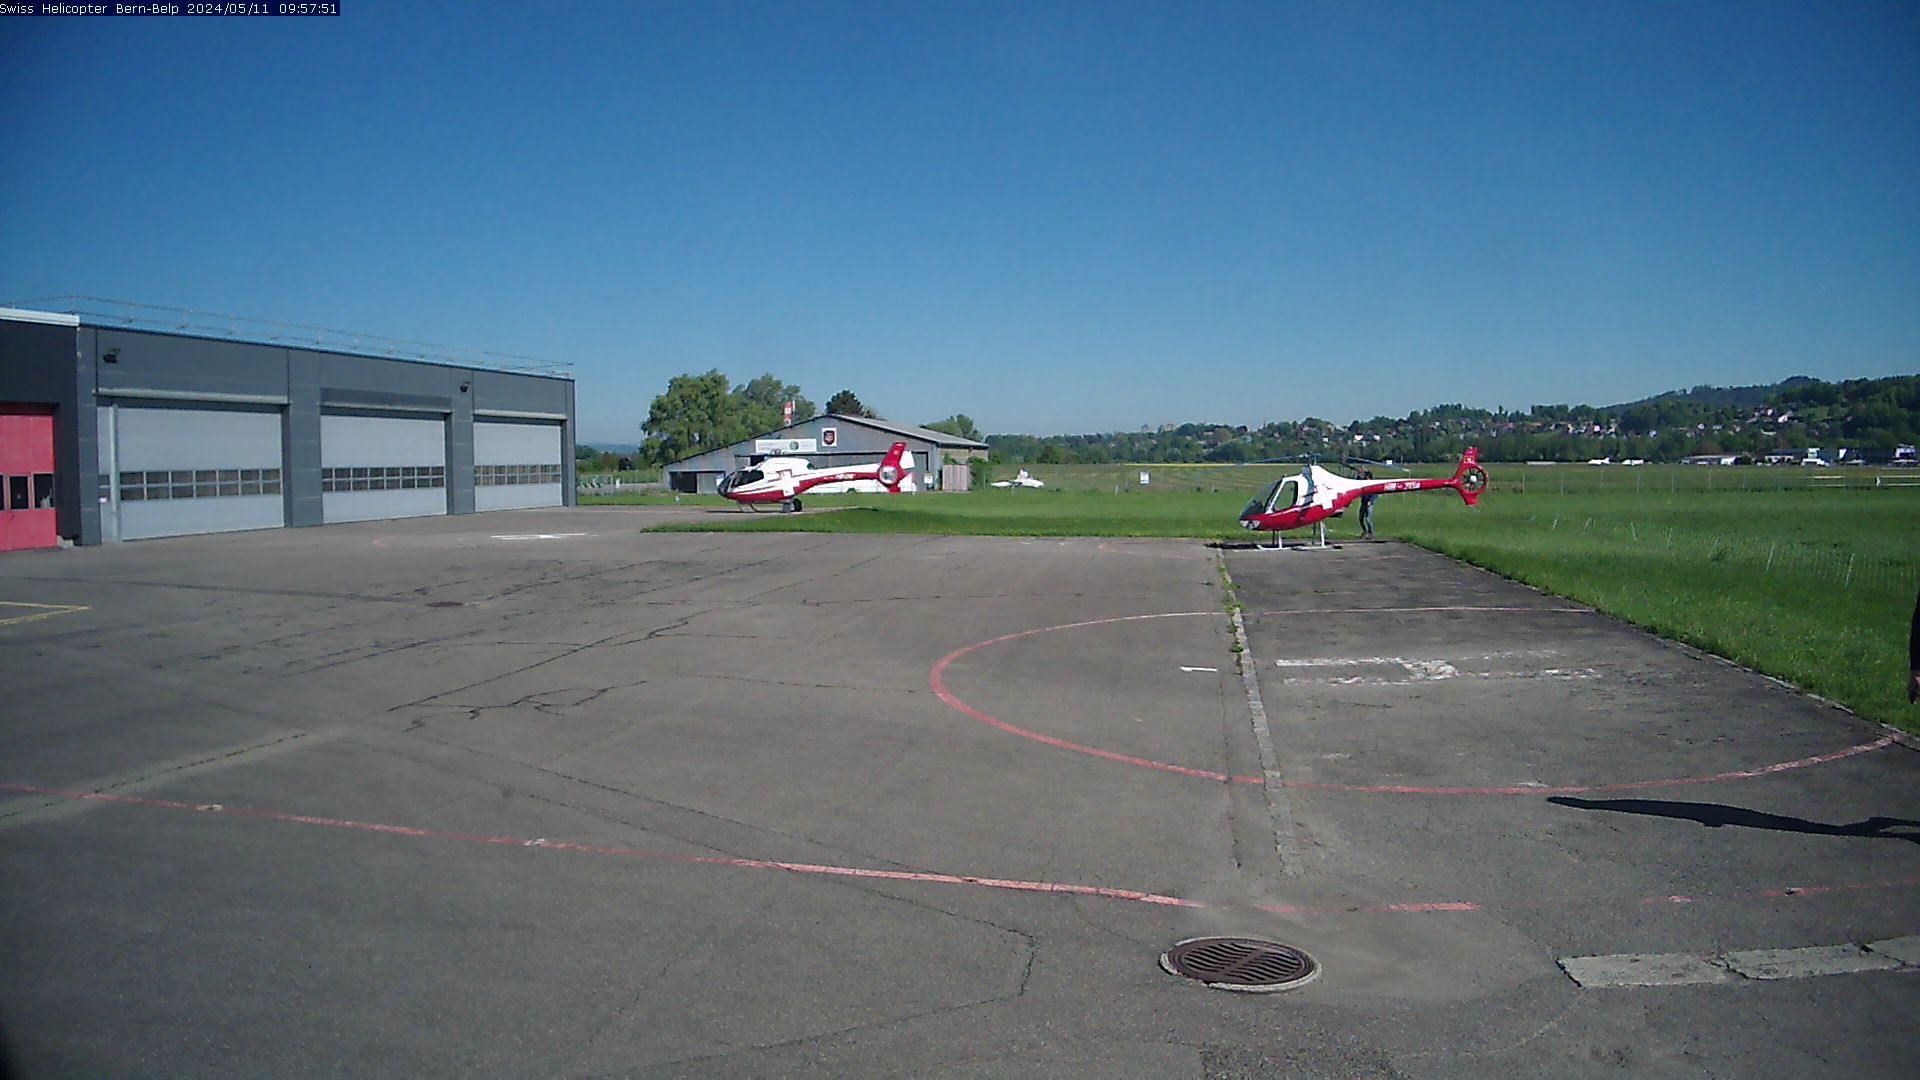 Belp: Swiss Helicopter AG - Bern